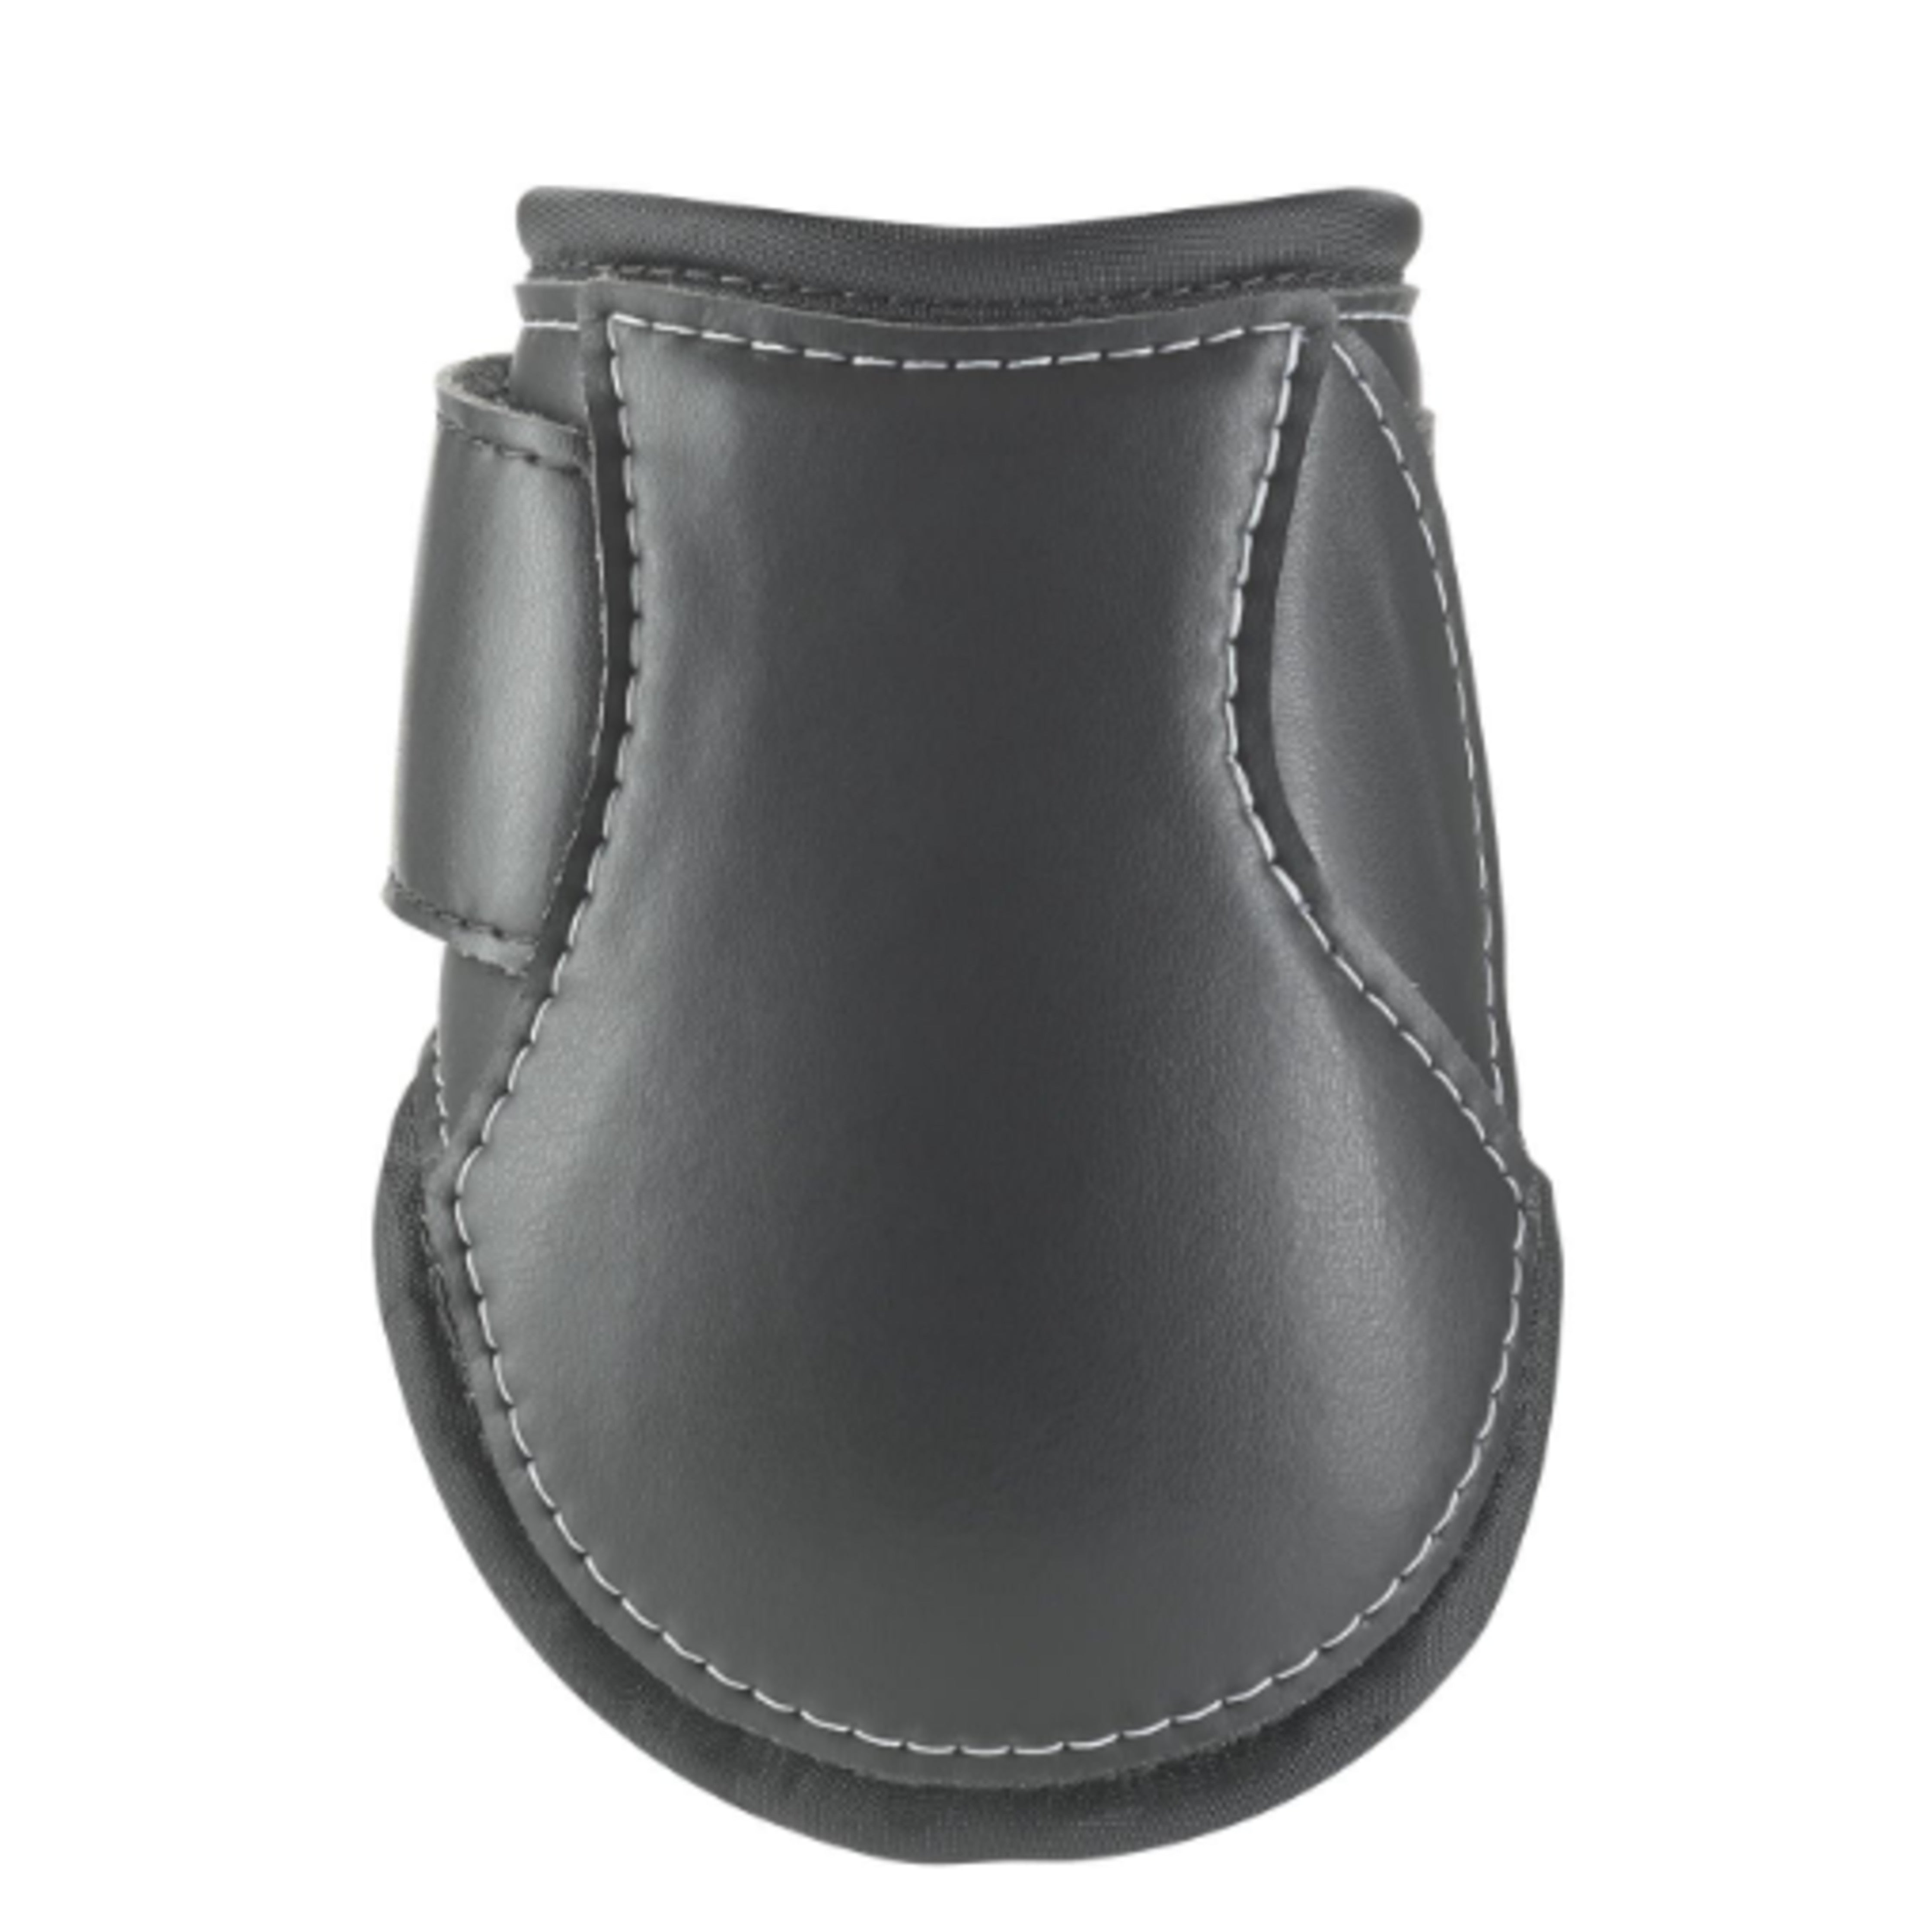 EquiFit FEI Young Horse Hind Boot